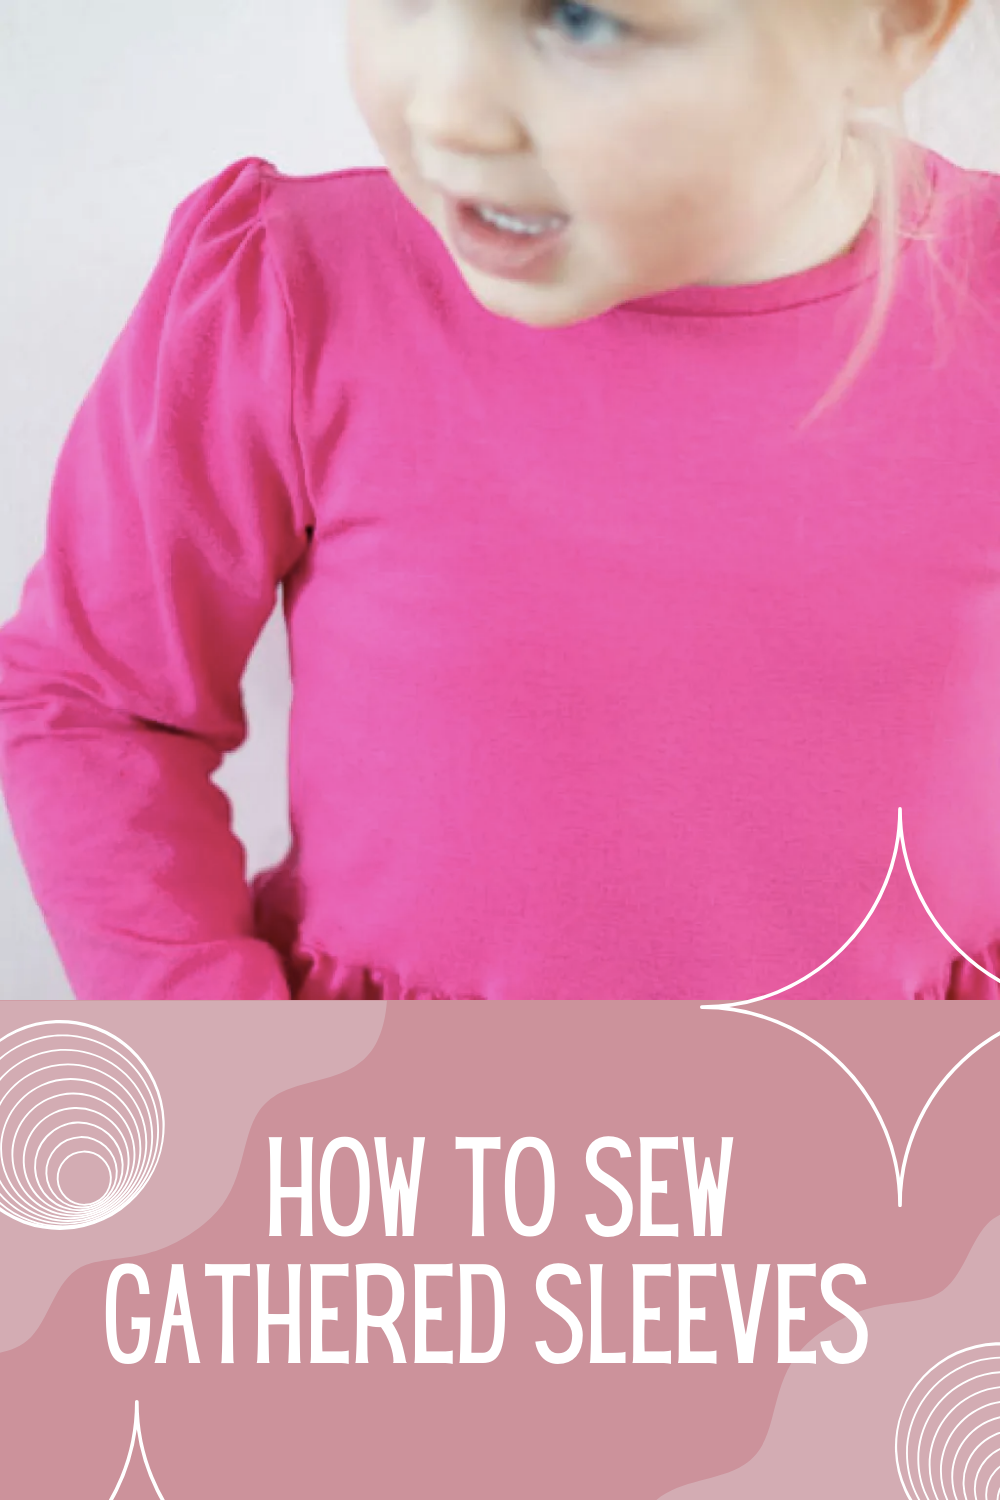 How To Sew Gathered Sleeves When Sewing